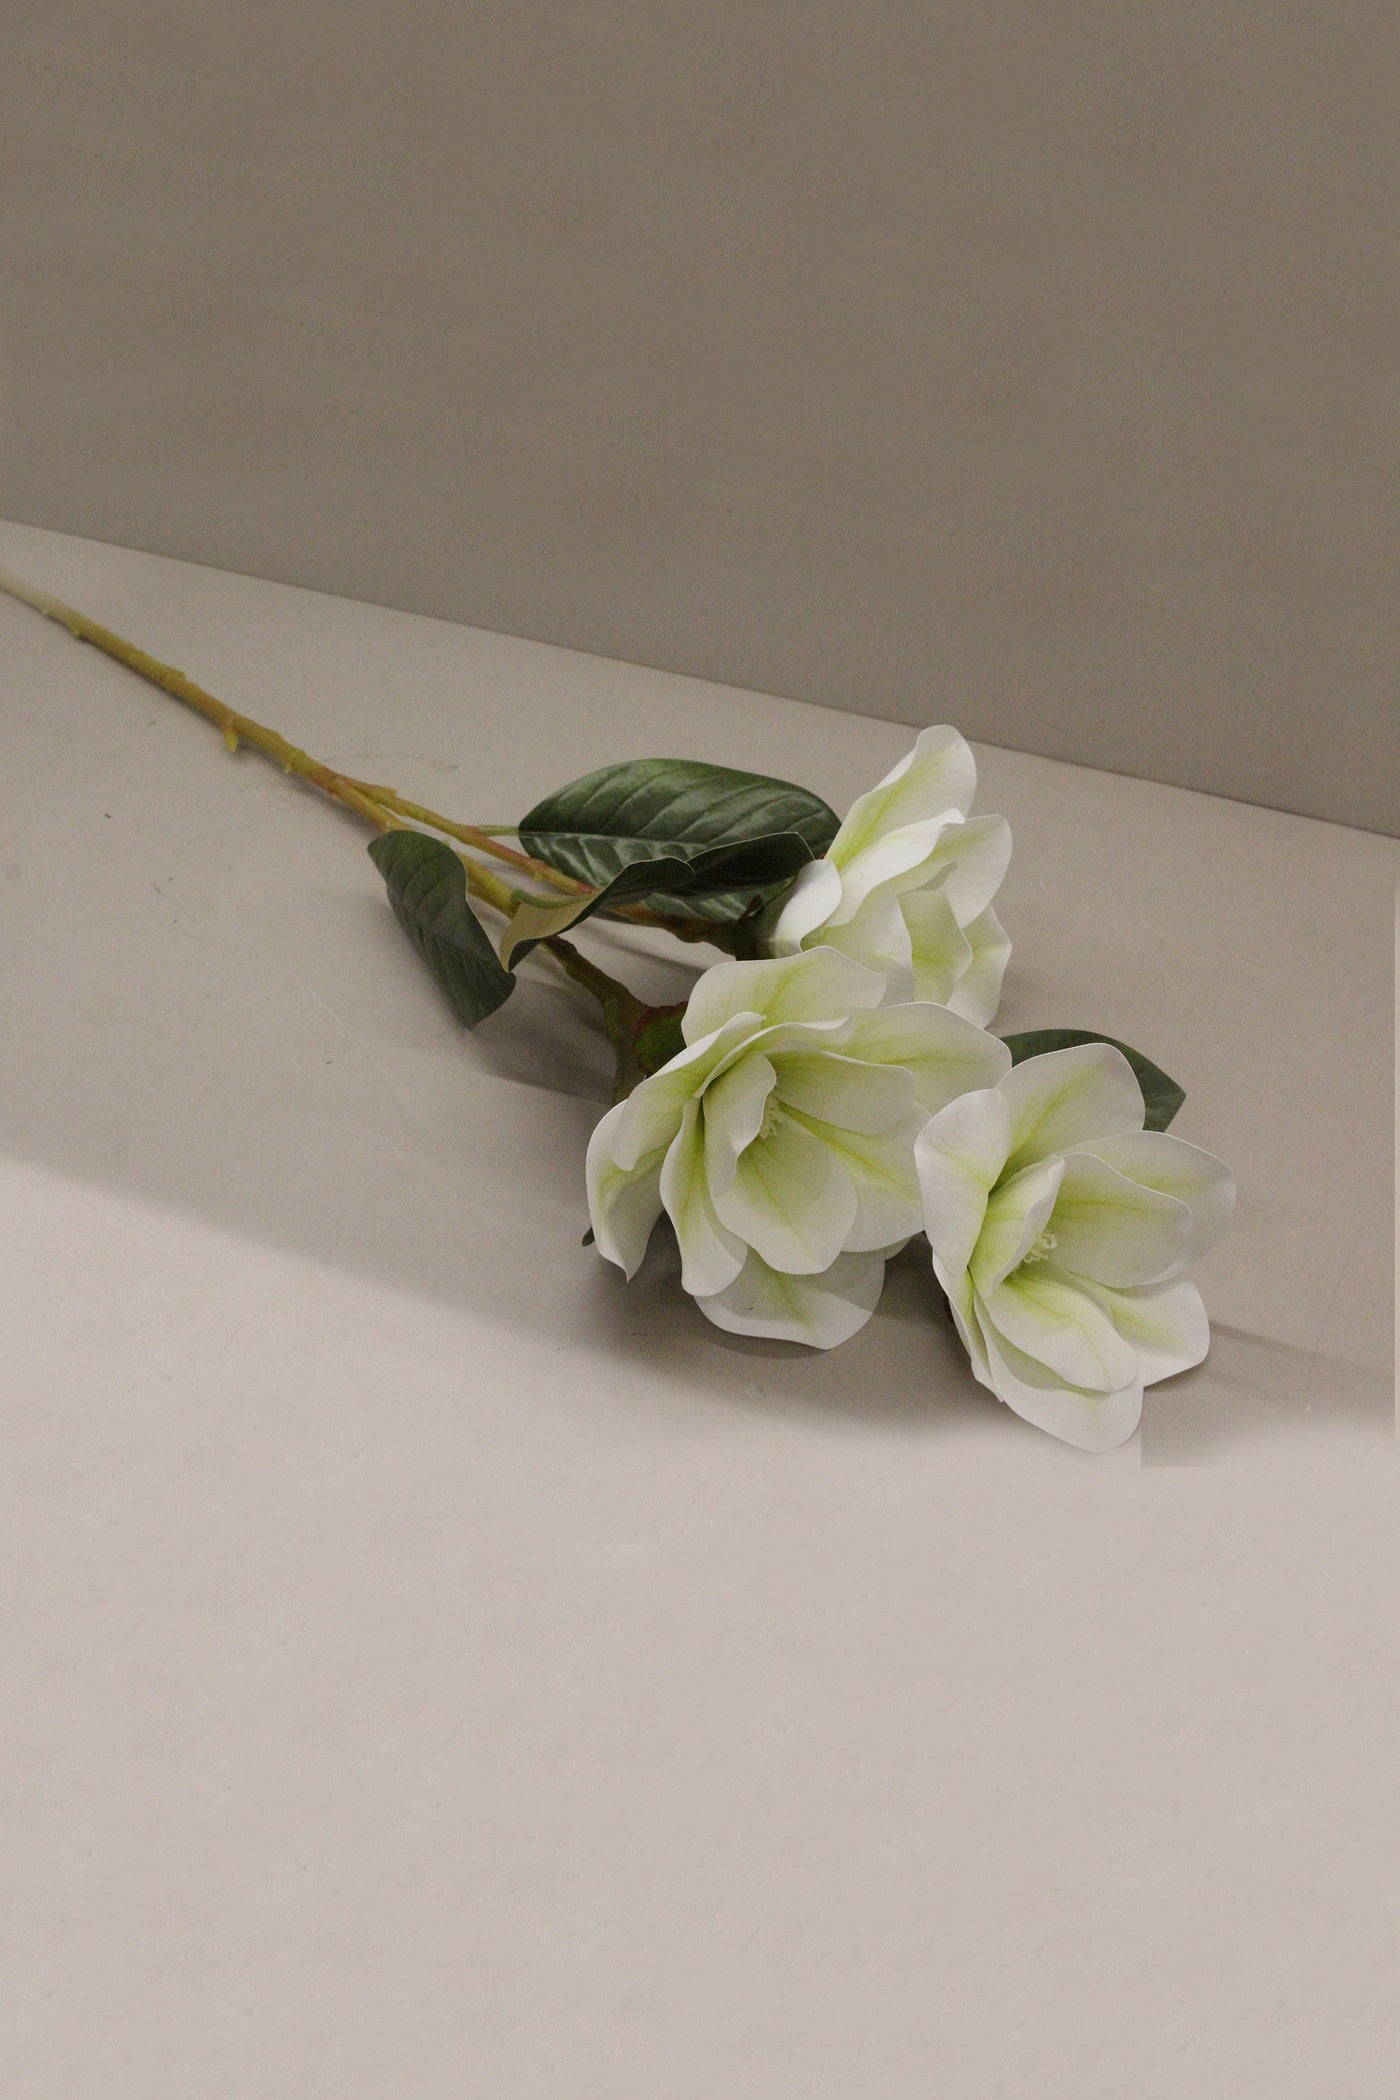 Artificial Magnolia Flowers for your Home or Office